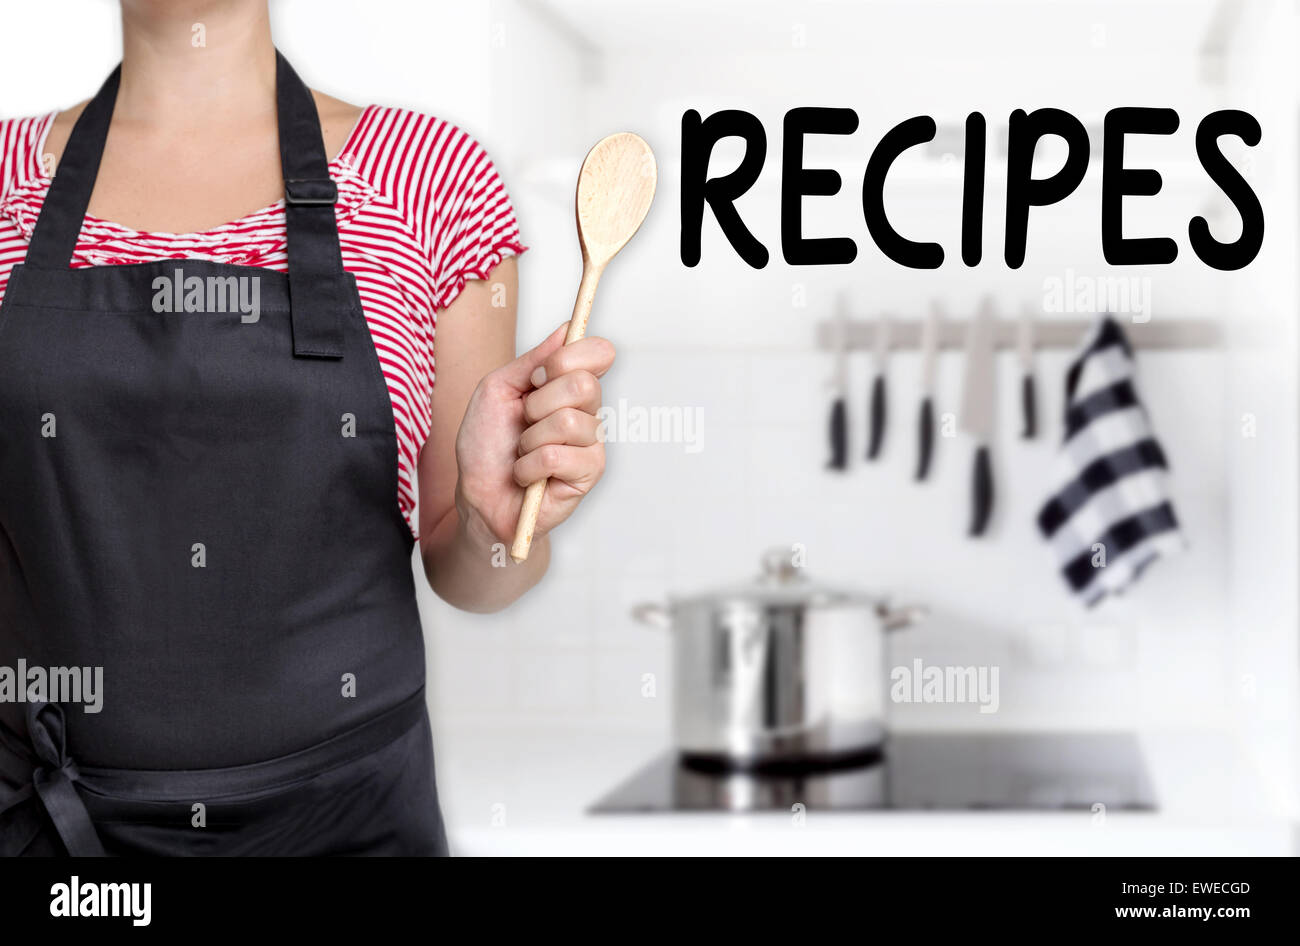 Recipes cook holding wooden spoon background. Stock Photo